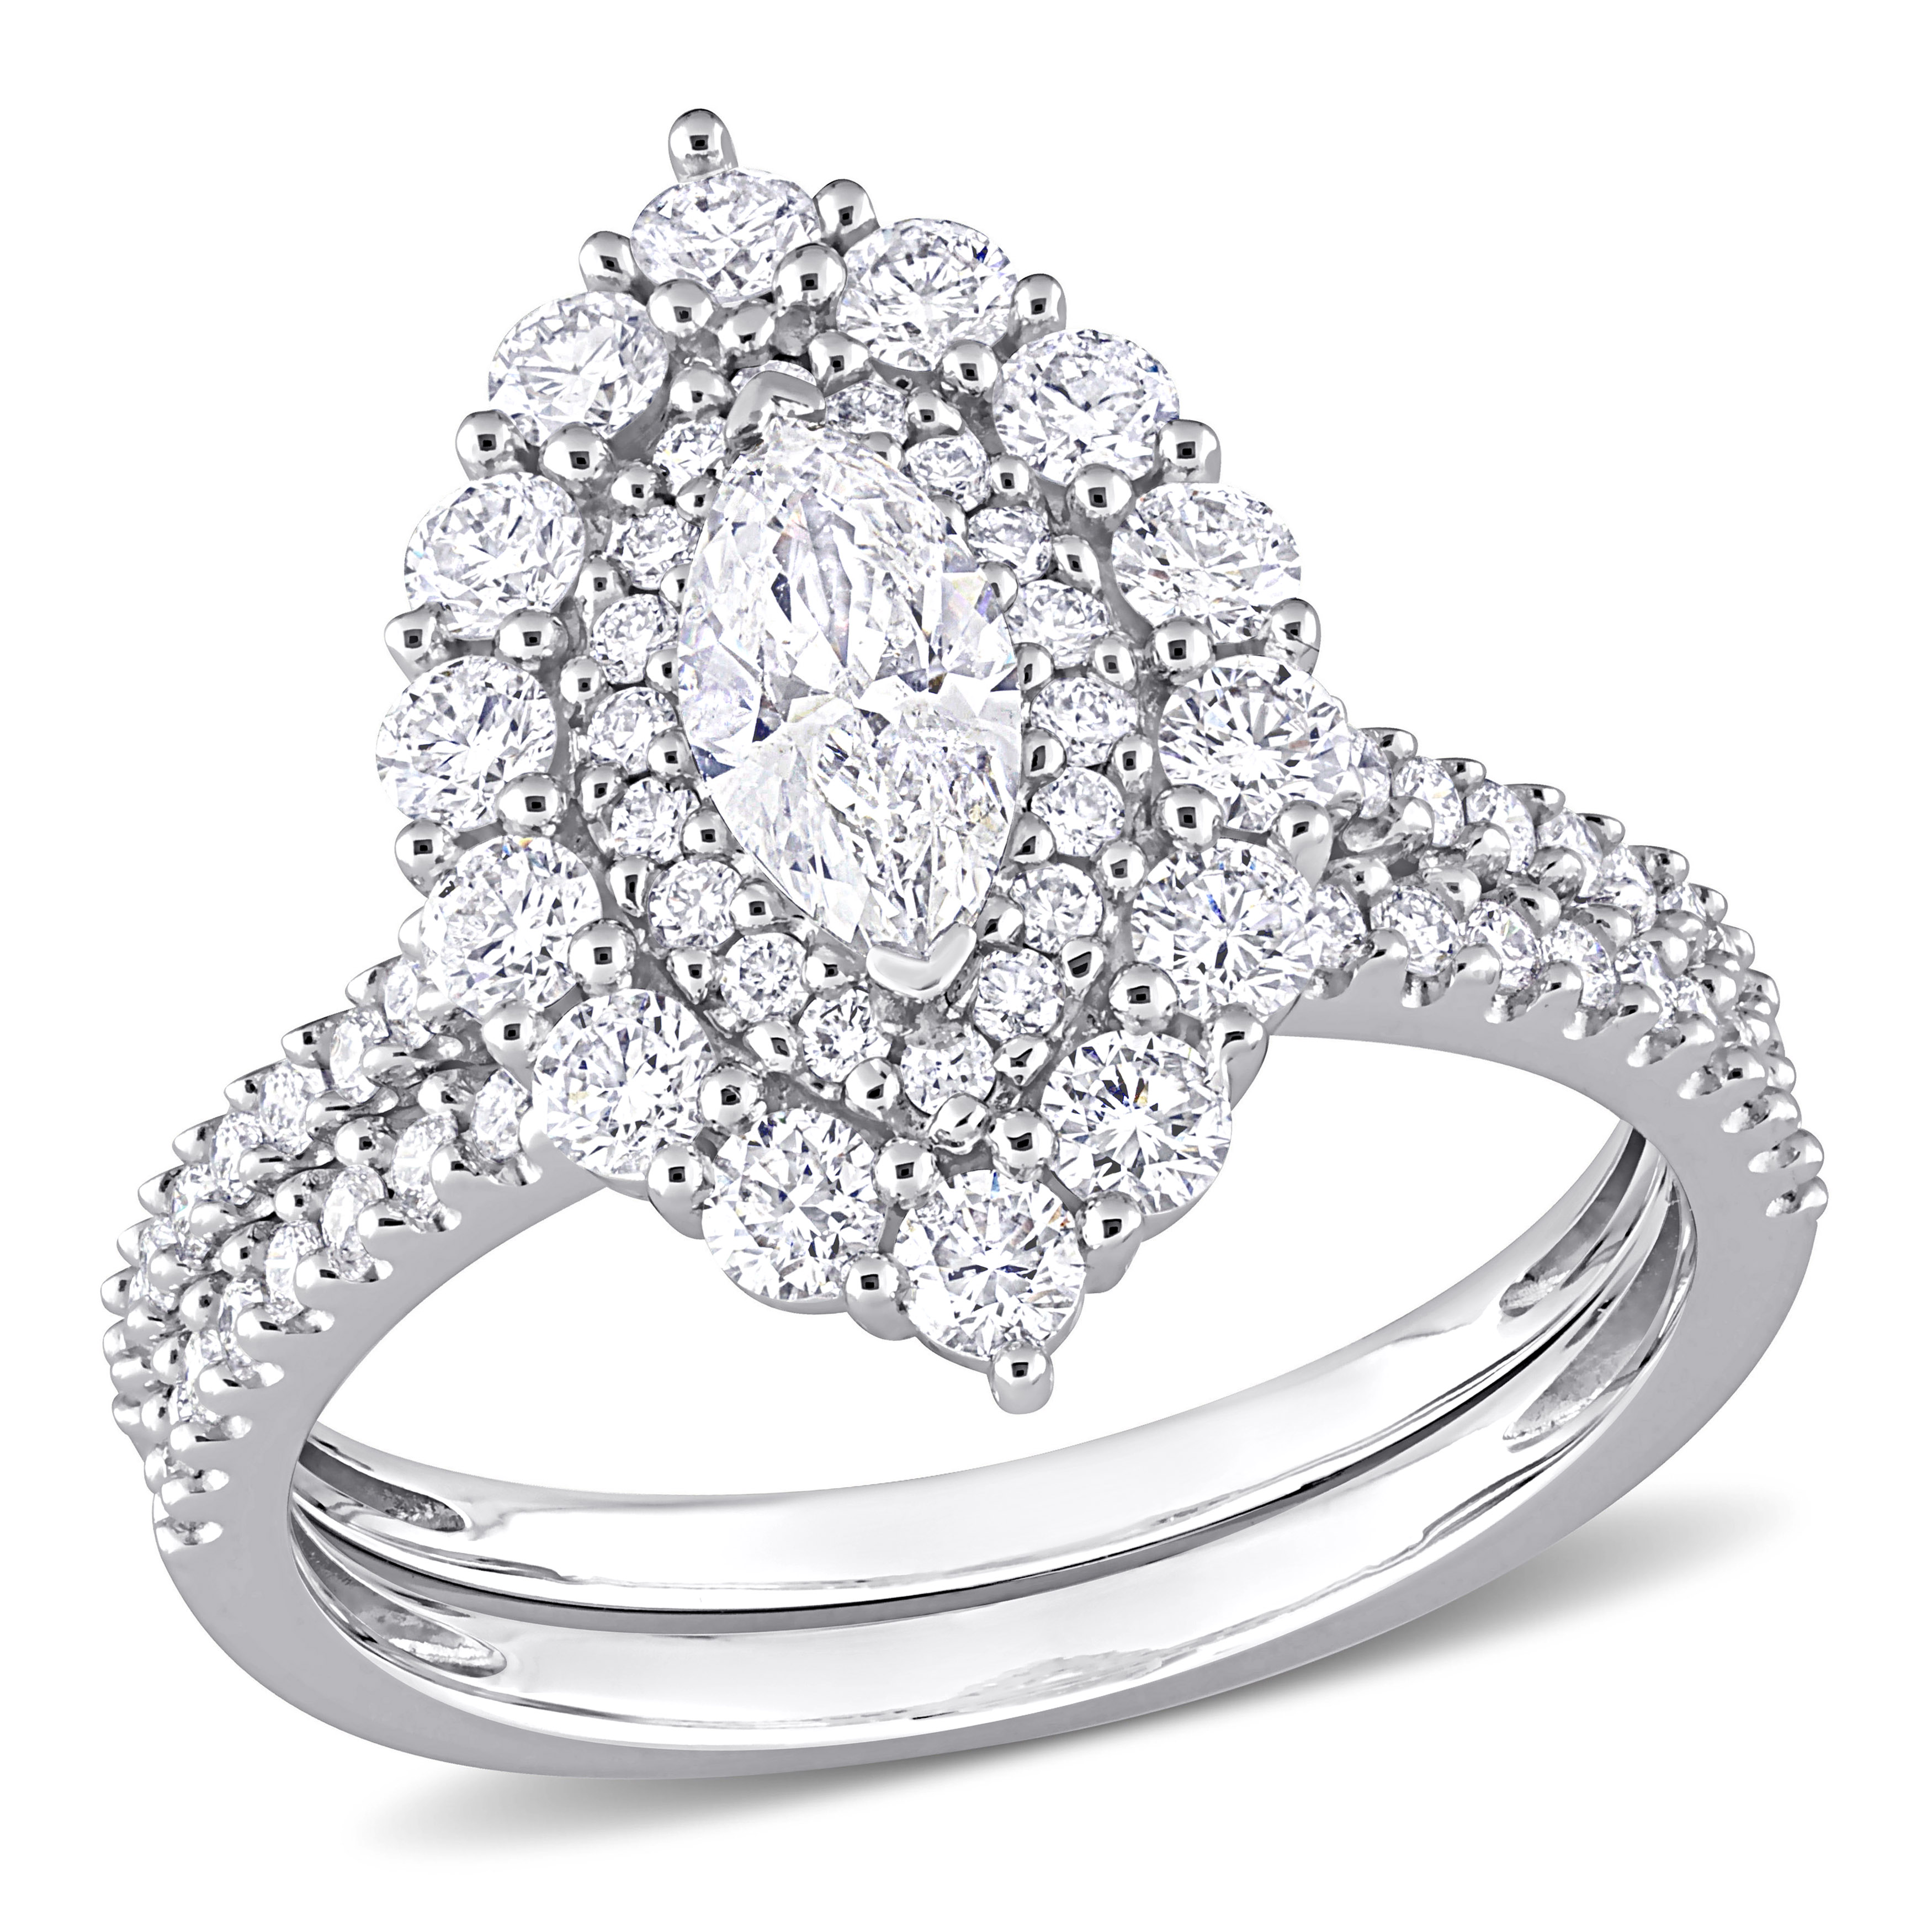 1/2 CT TW Marquise & Round Diamond Double Halo Cluster Bridal Set in 14k White Gold